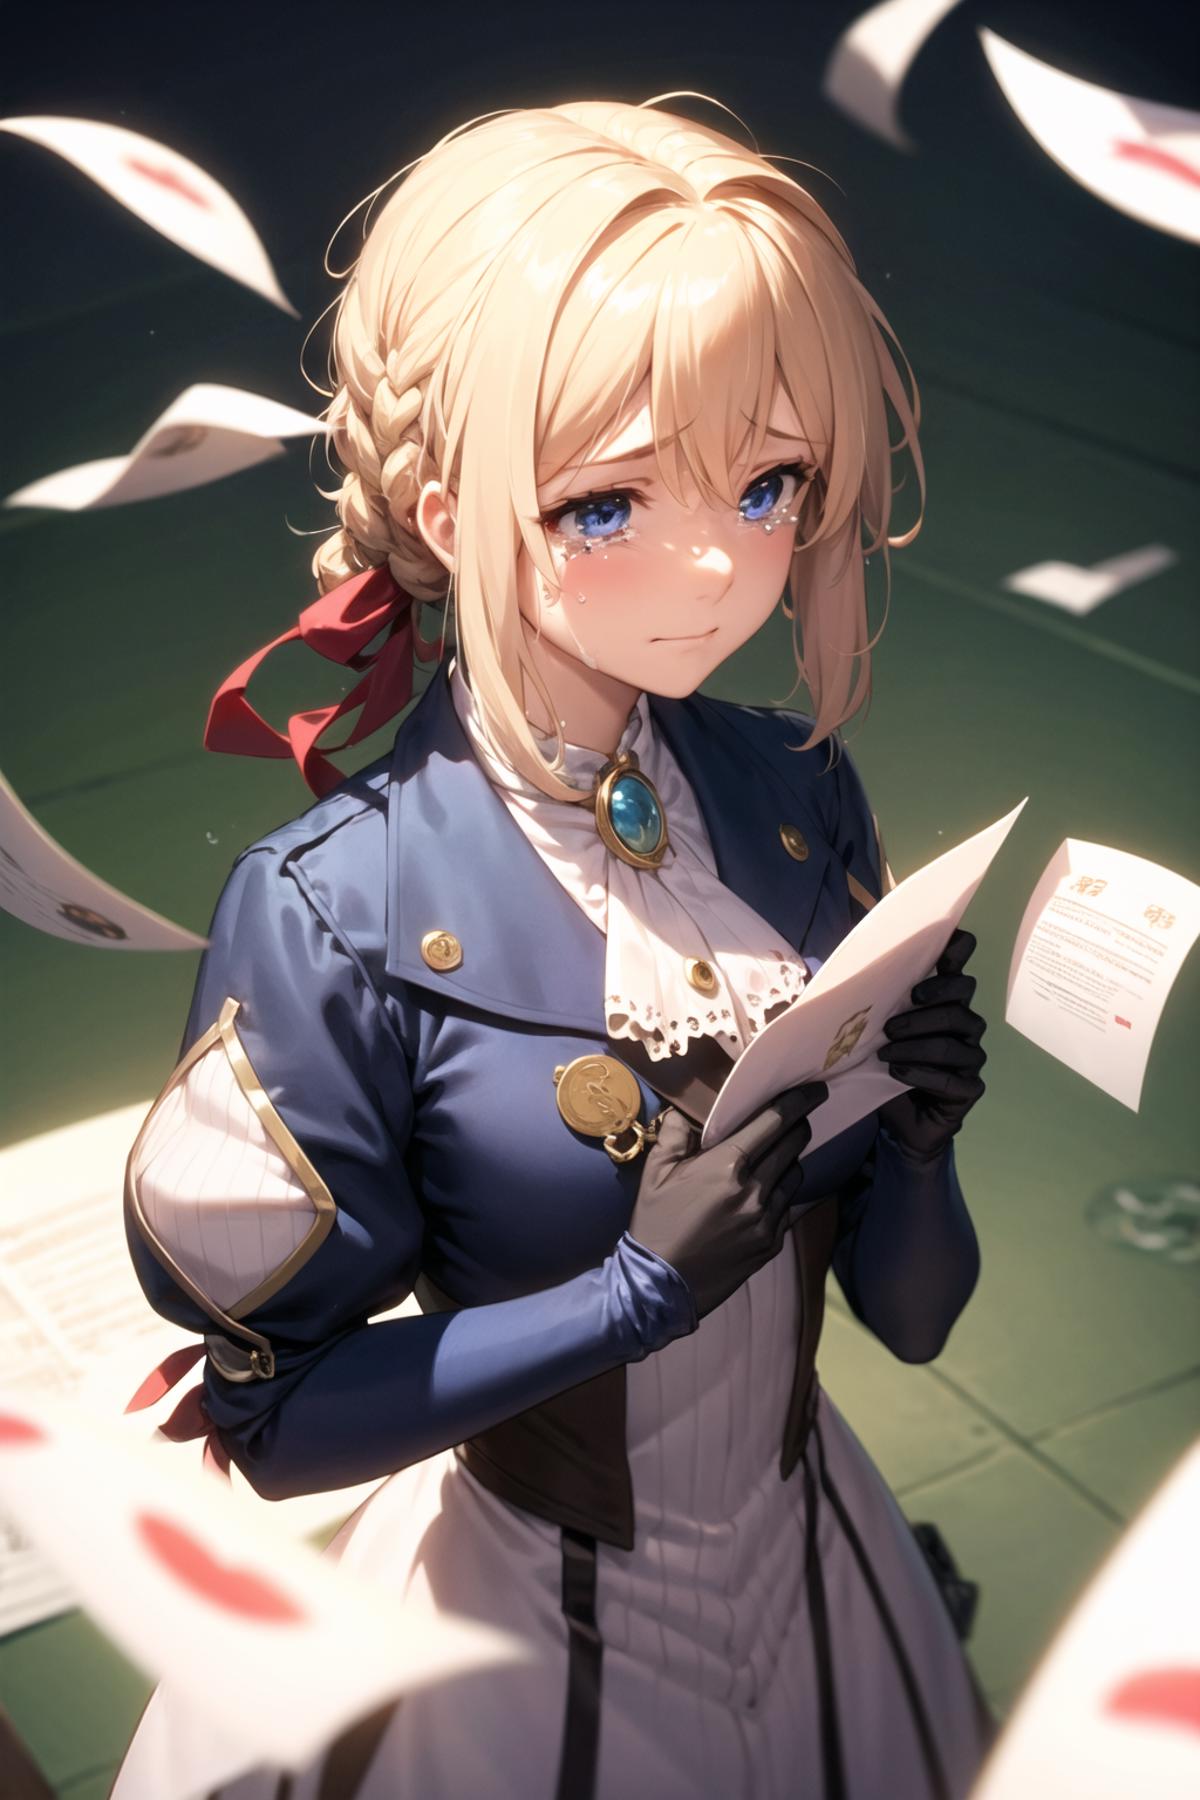 Violet Evergarden image by Anzhc